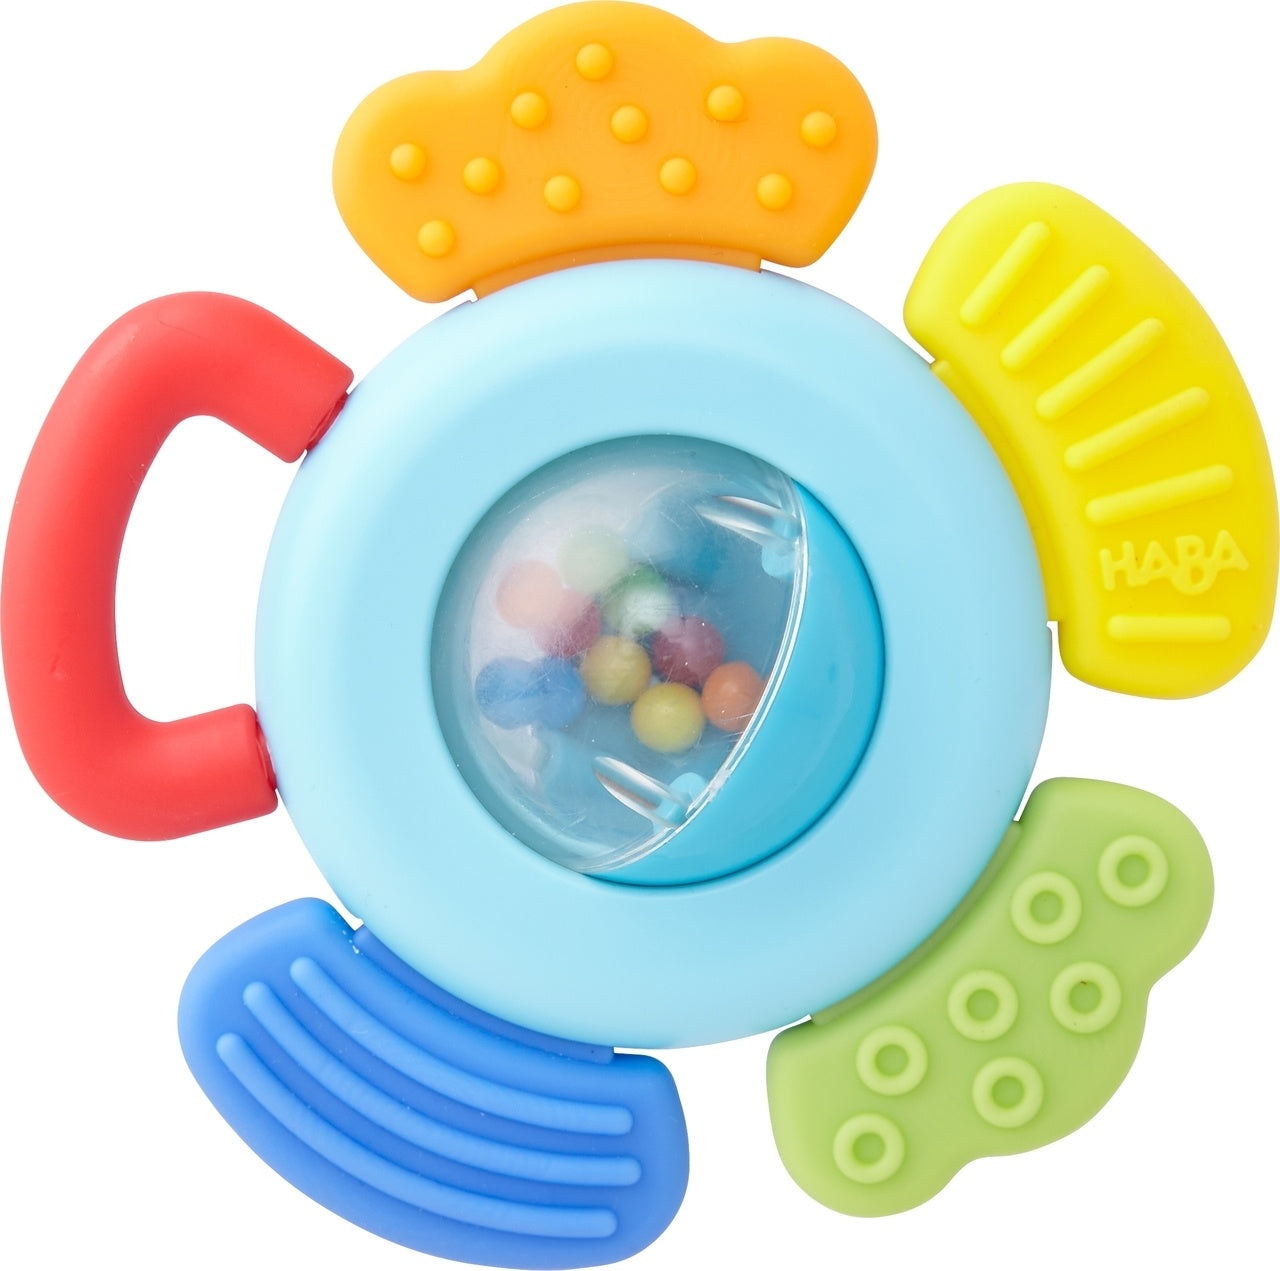 Haba Silicone Clutching Toy